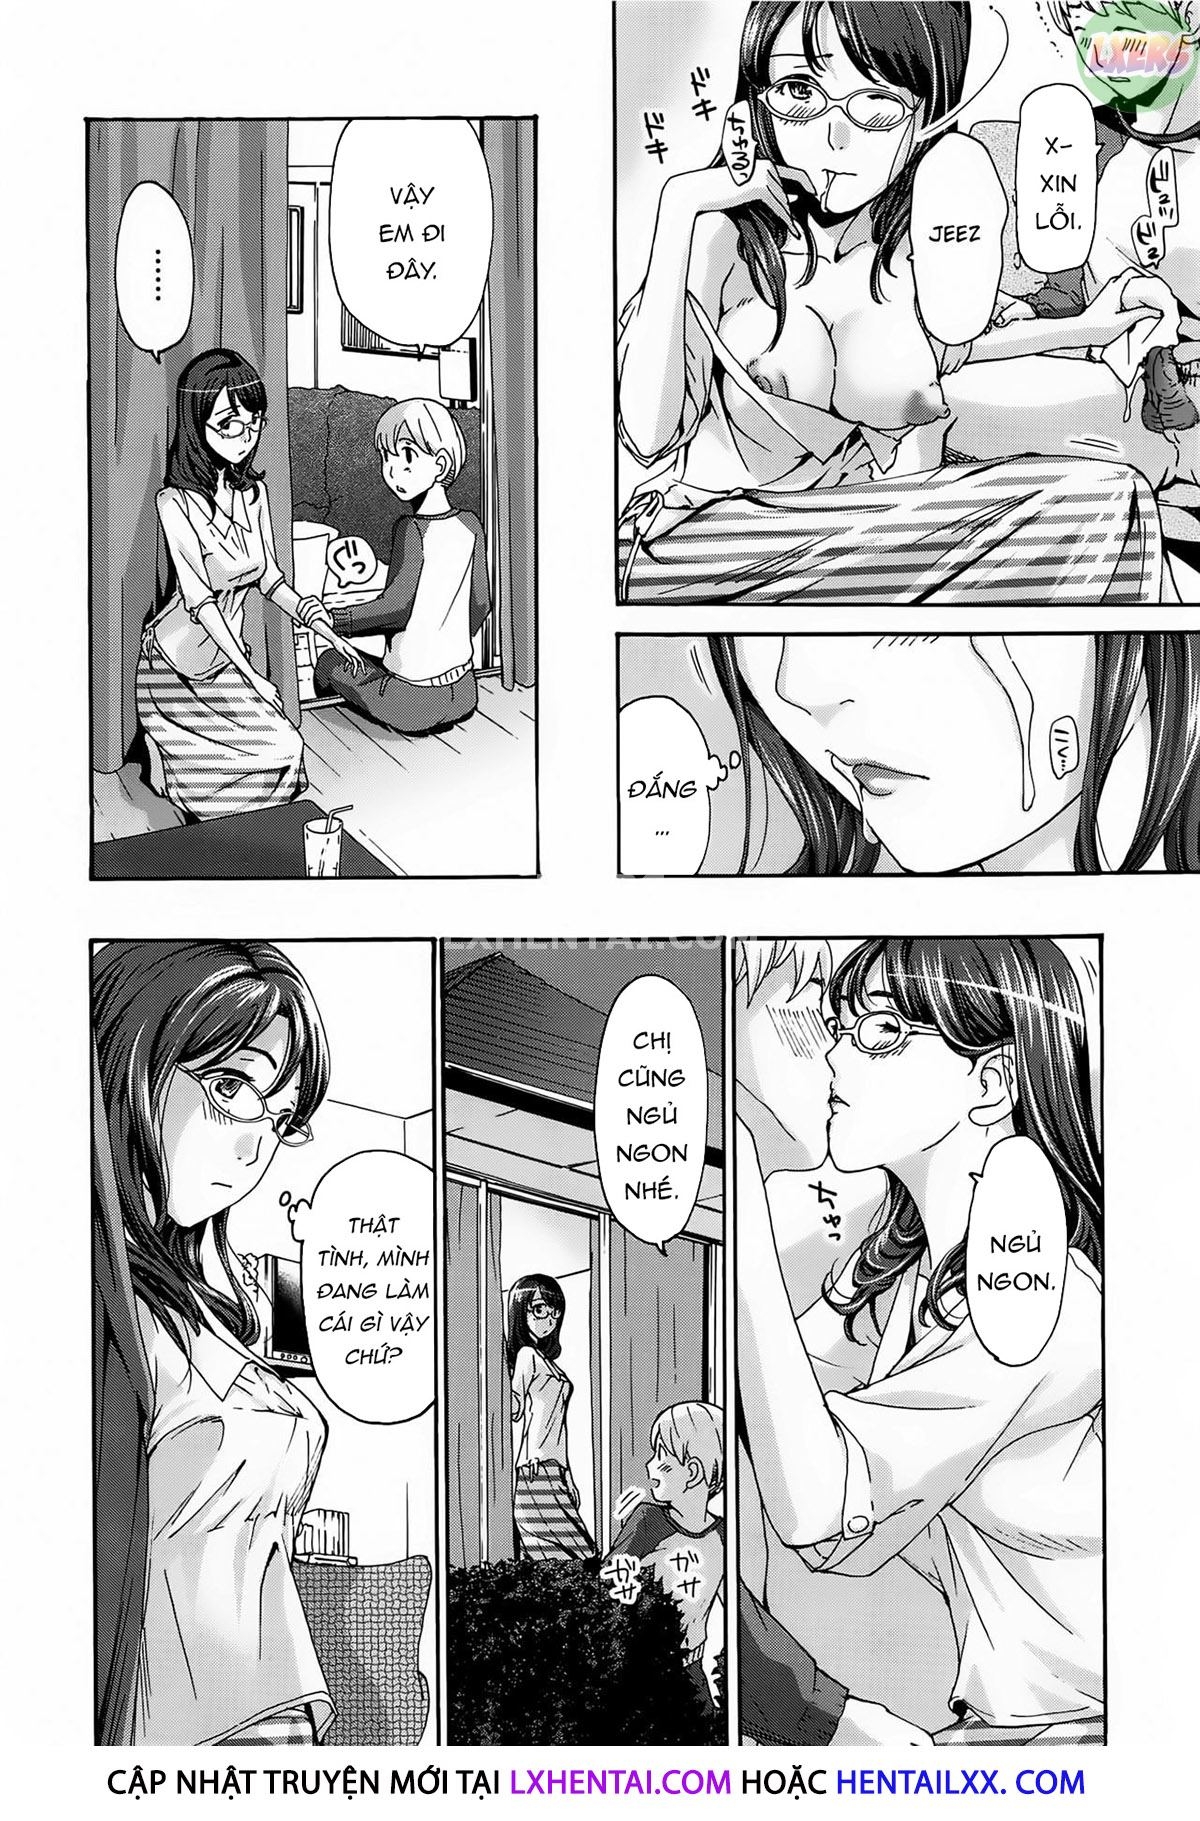 Xem ảnh Will You Have Sex With Me - Chap 2 - 1648571307745_0 - HentaiTruyen.net